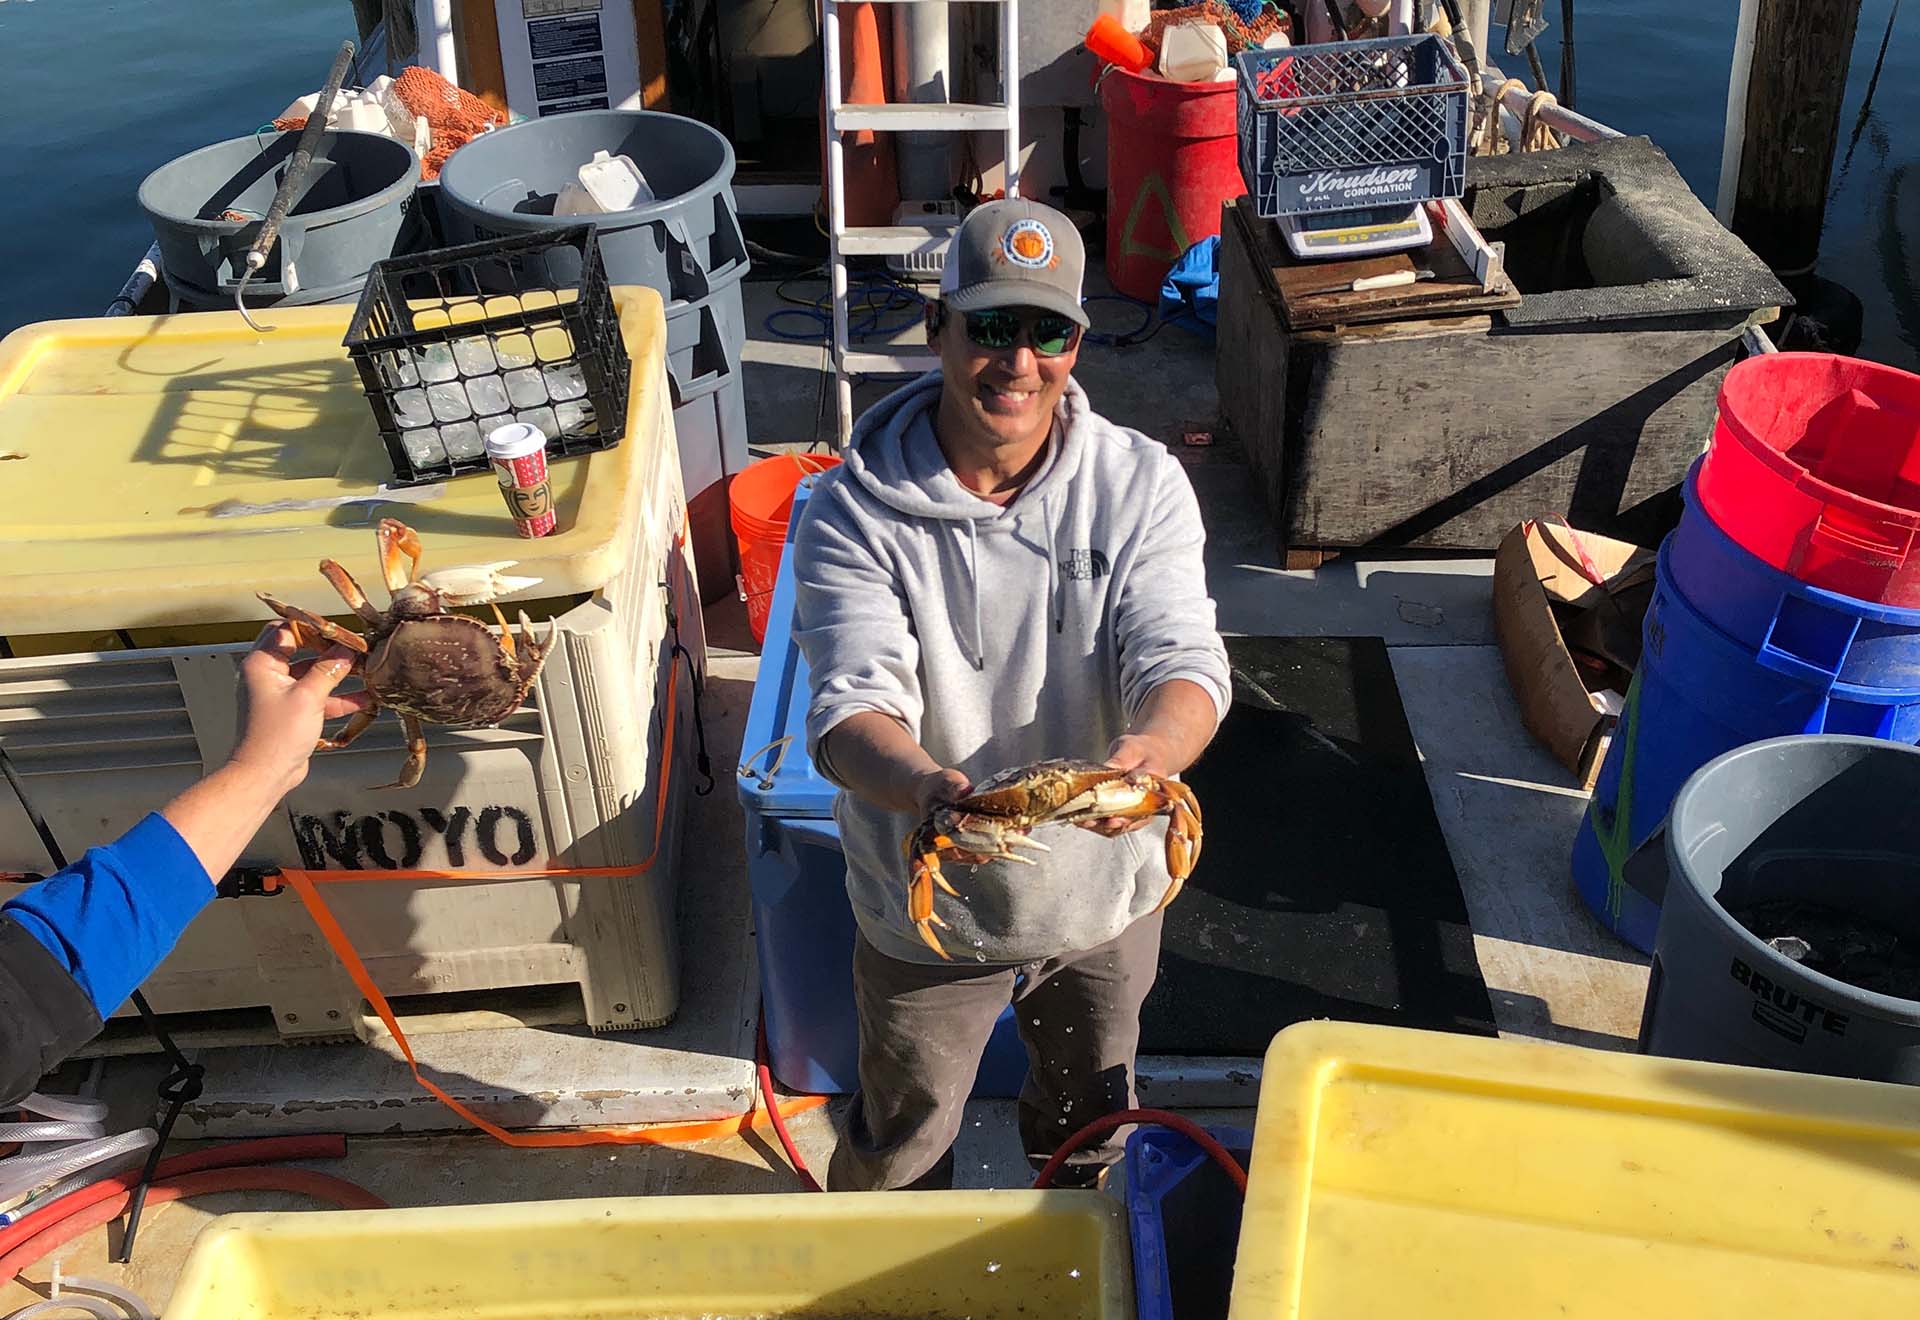 A crab fisherman in a trucker hat smiles as he holds up a live Dungeness crab from the deck of his fishing boat.